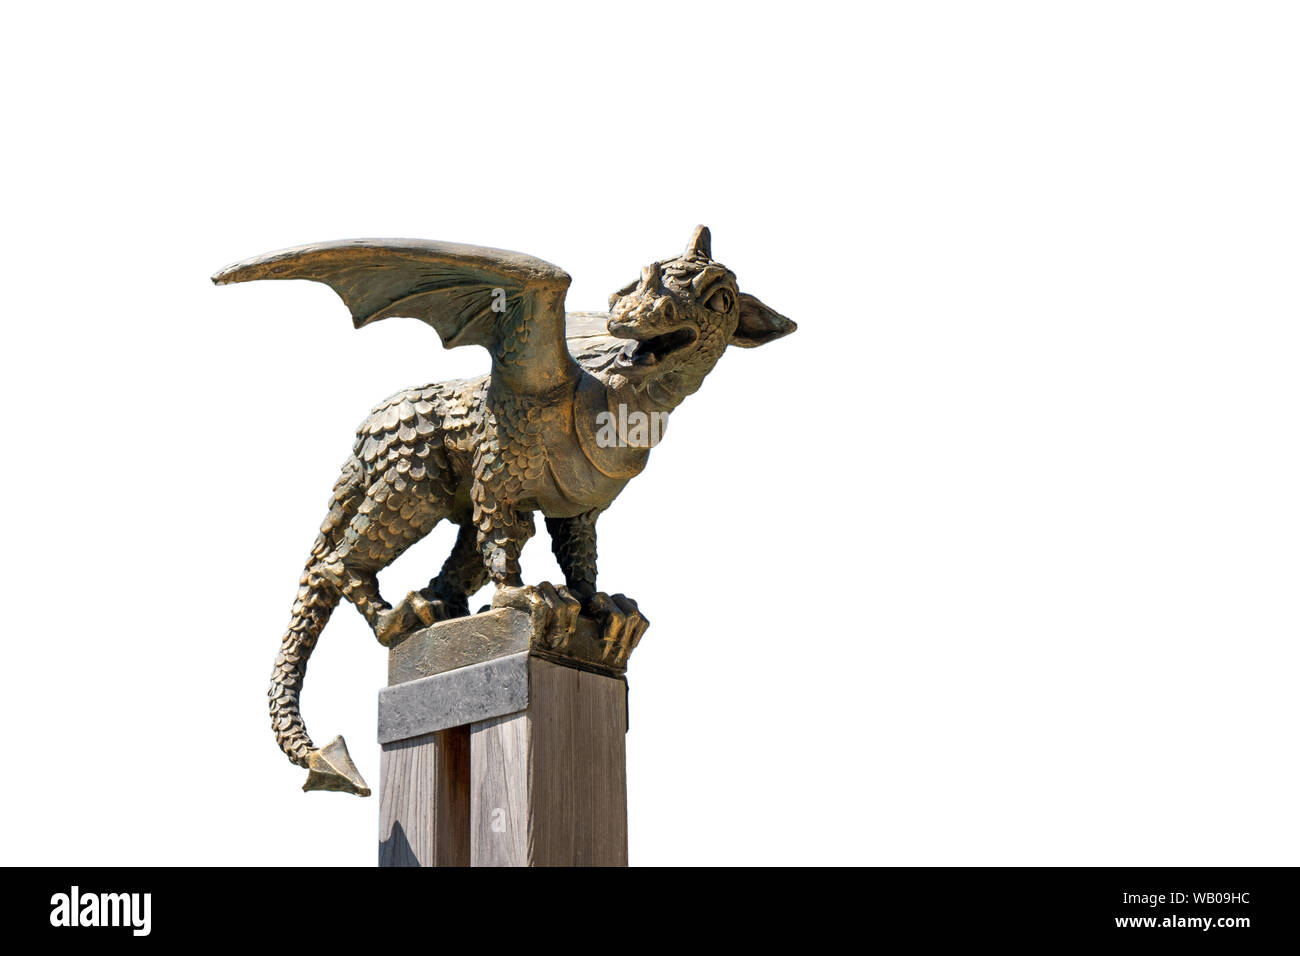 Solcava, August 17 2019: Bronze statue of the Lintver dragon, a signpost on the Solcava Panoramic road above Logar valley in Slovenia Stock Photo